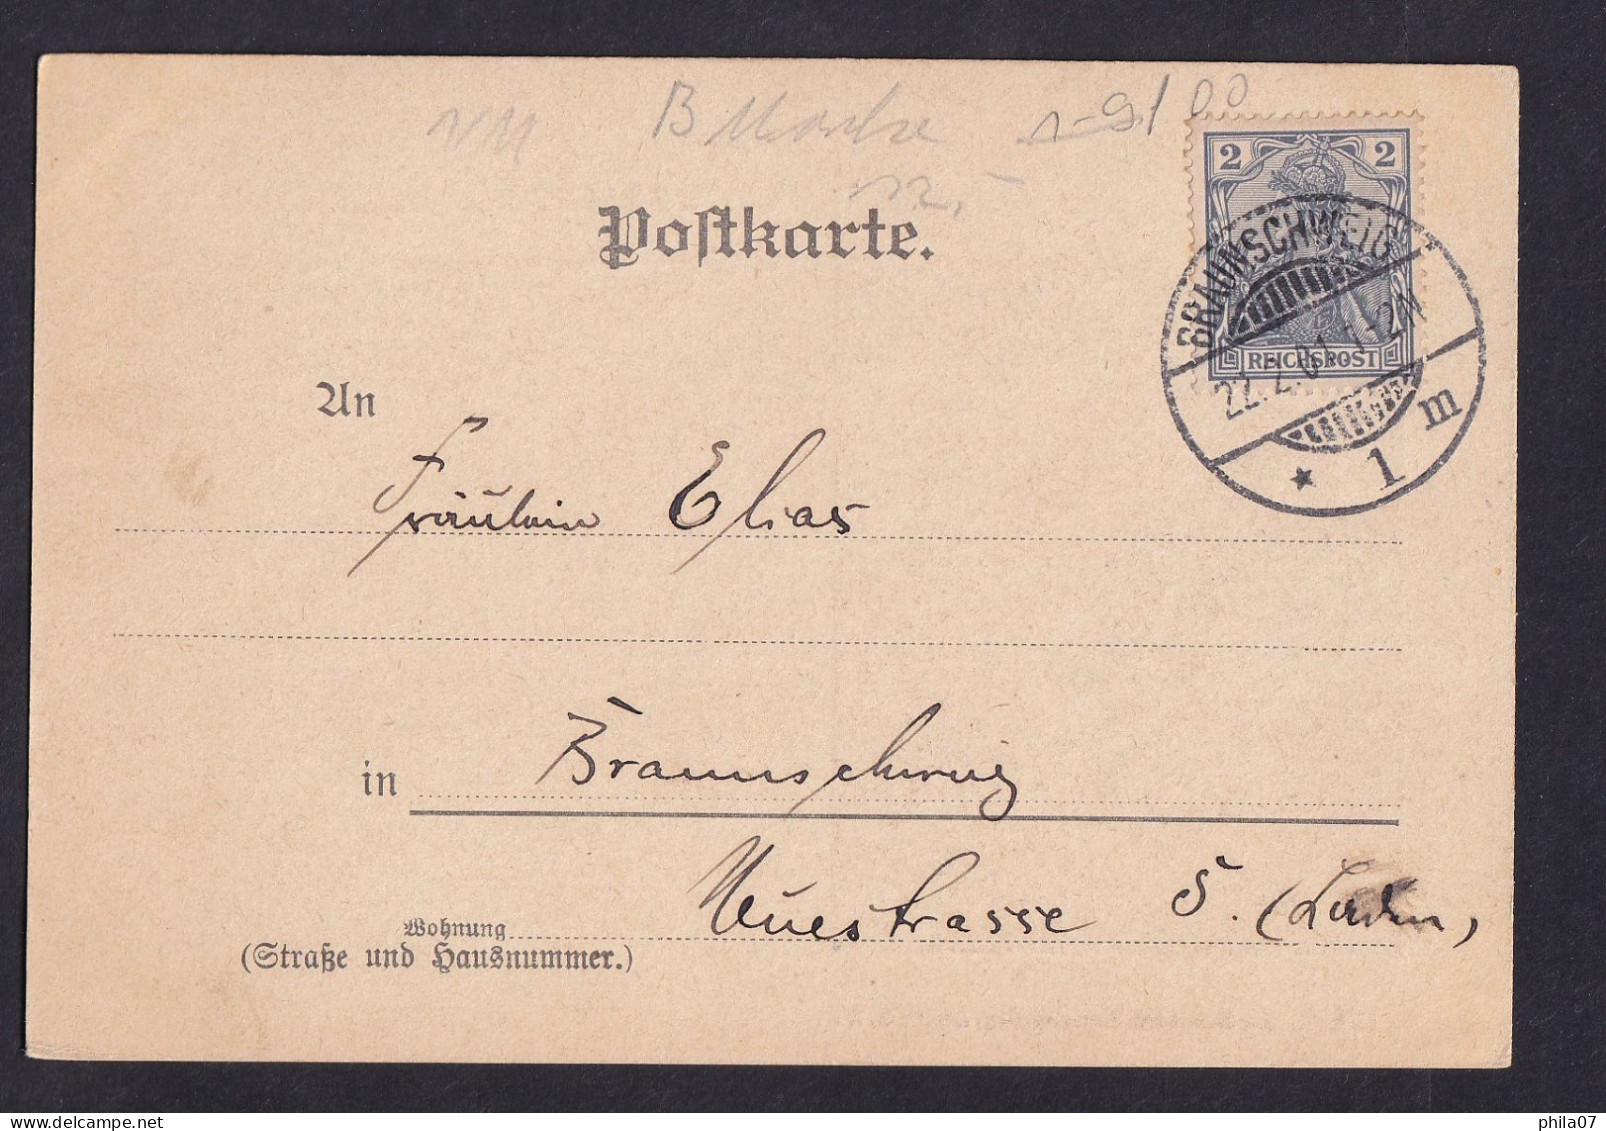 Gruss Aus .... - E.Riedel, Kunstverlag, Berlin S.W. / Year 1901 / Long Line Postcard Circulated, 2 Scans - Greetings From...